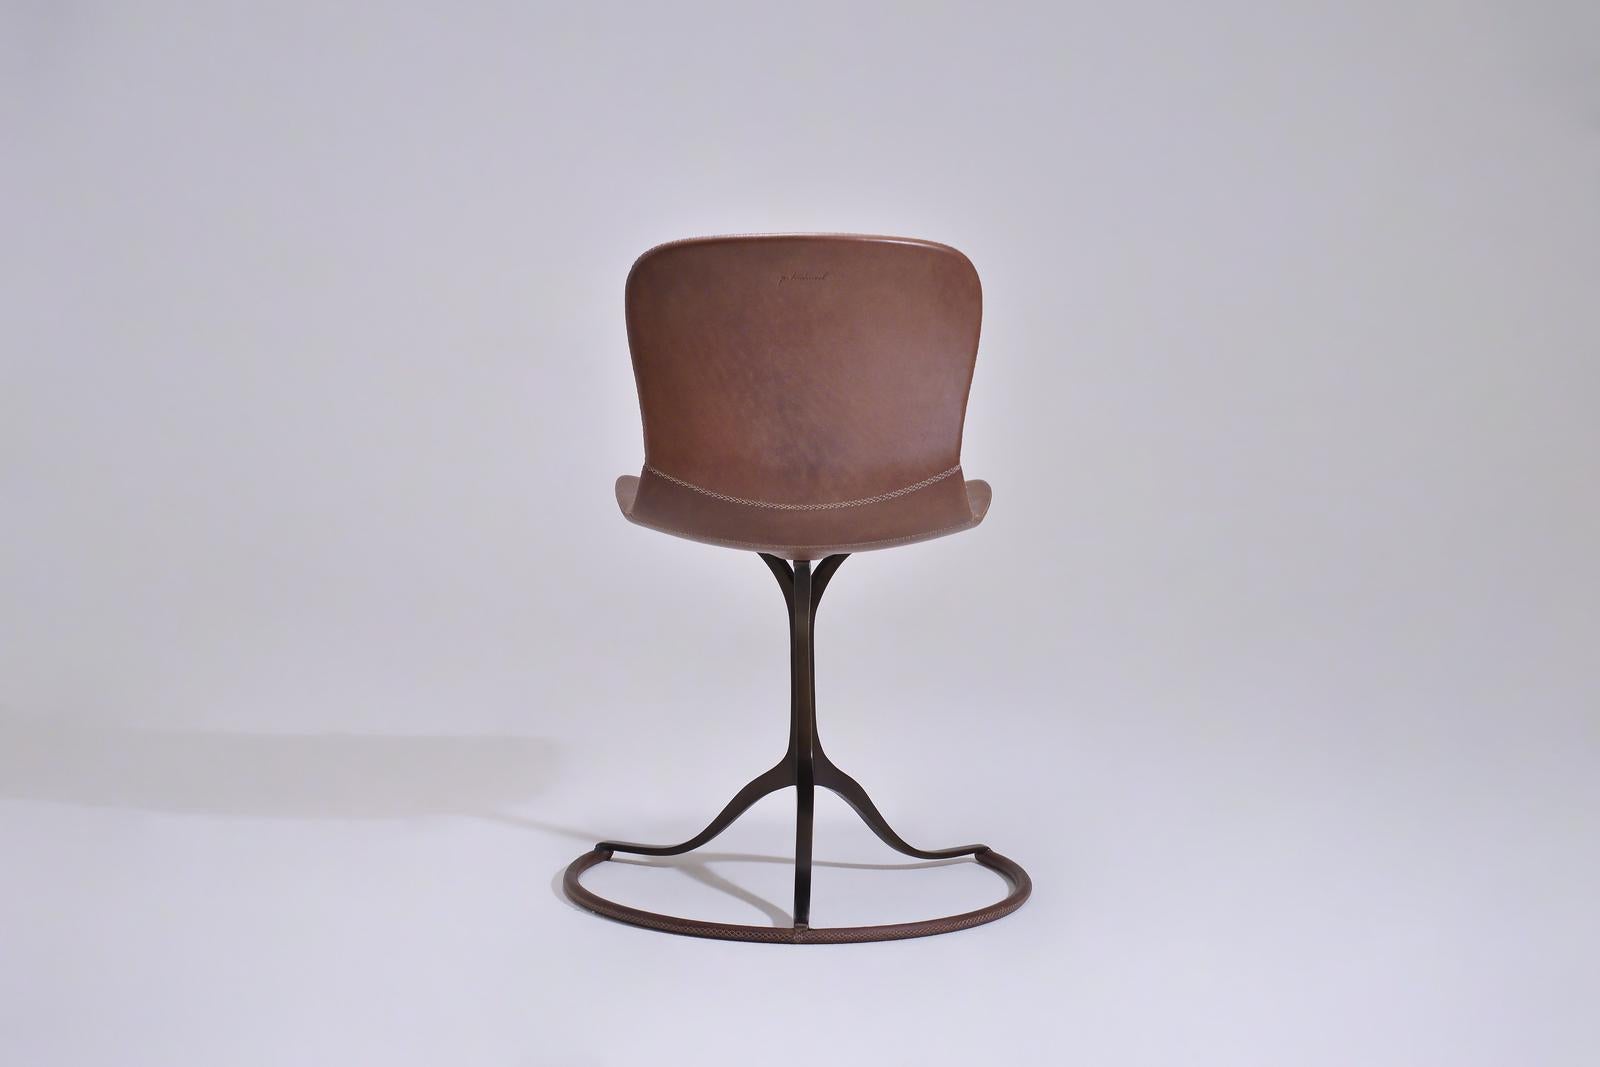 Mid-Century Modern Bespoke Sand Cast Brass Chair in Truffe Leather, by P. Tendercool For Sale